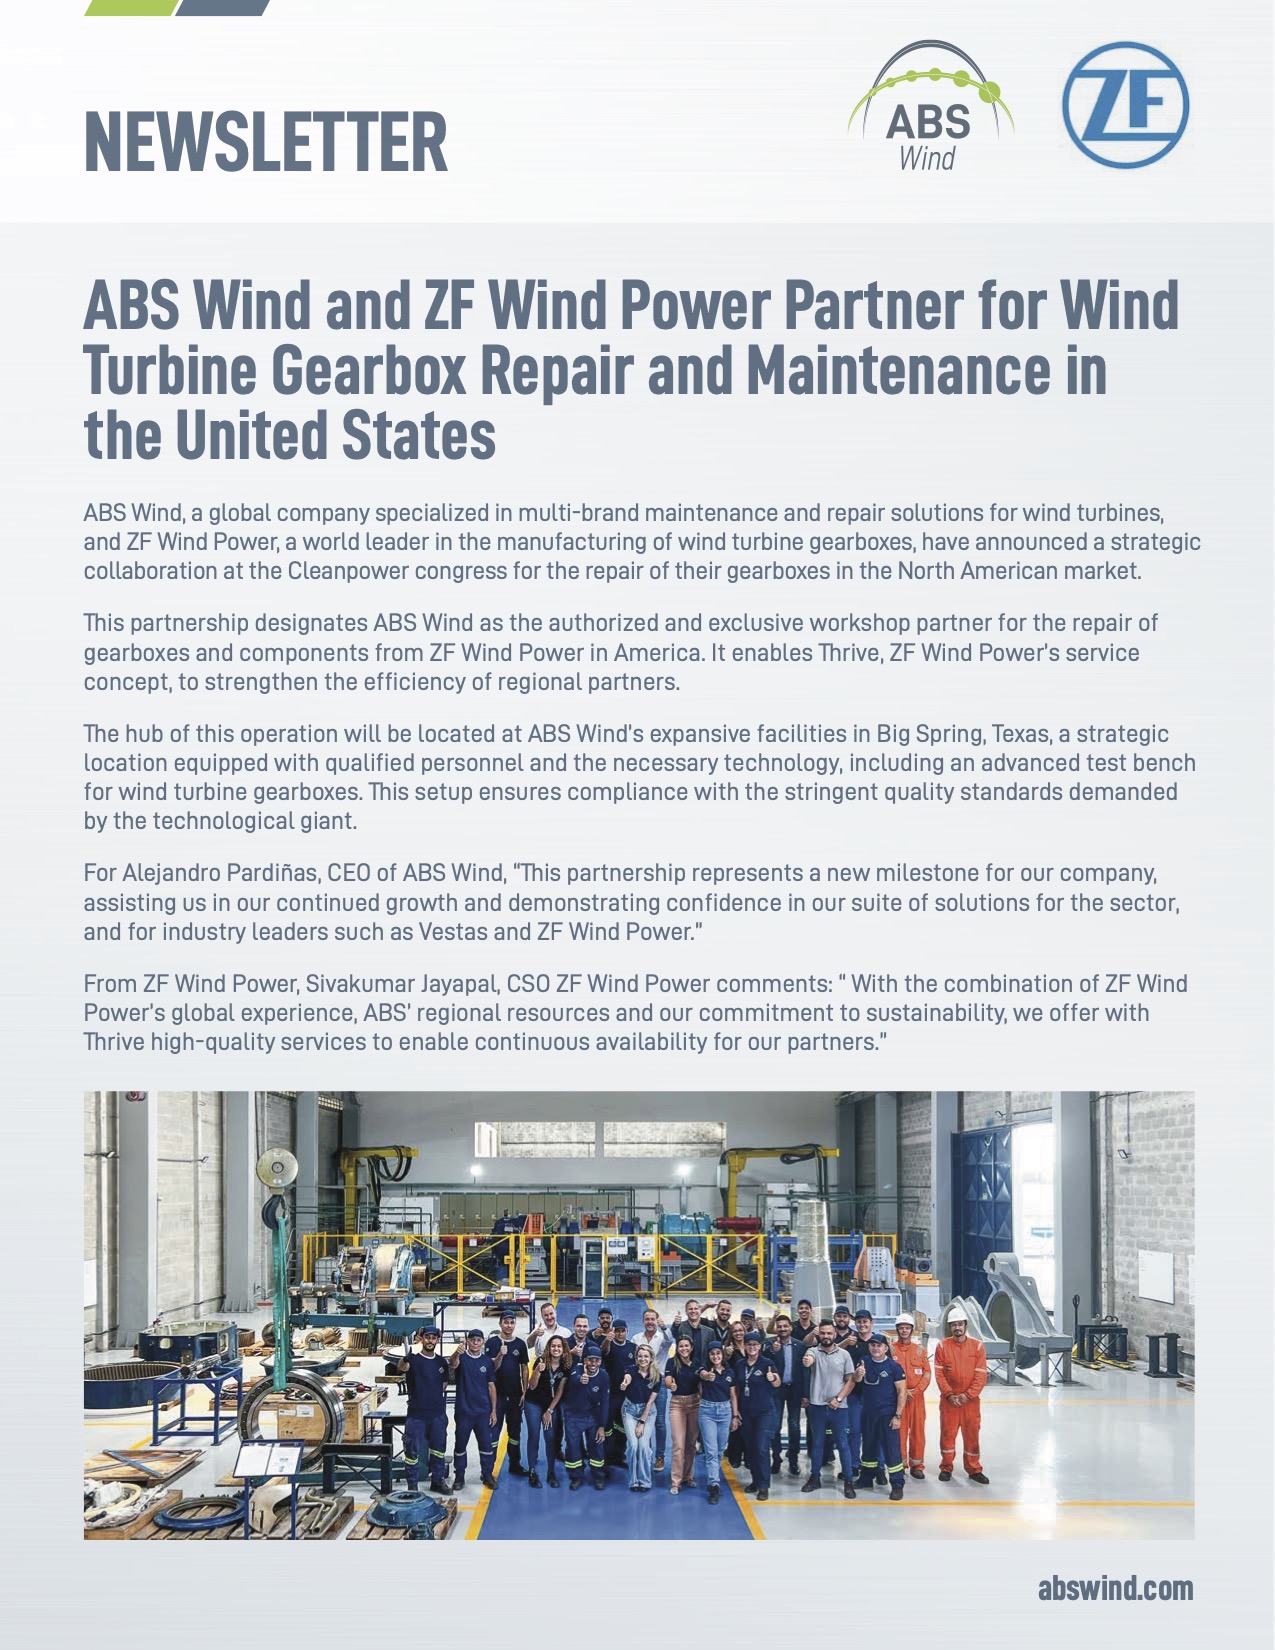 ABS Wind and ZF Wind Power Partner for Wind Turbine Gearbox Repair and Maintenance in the United States